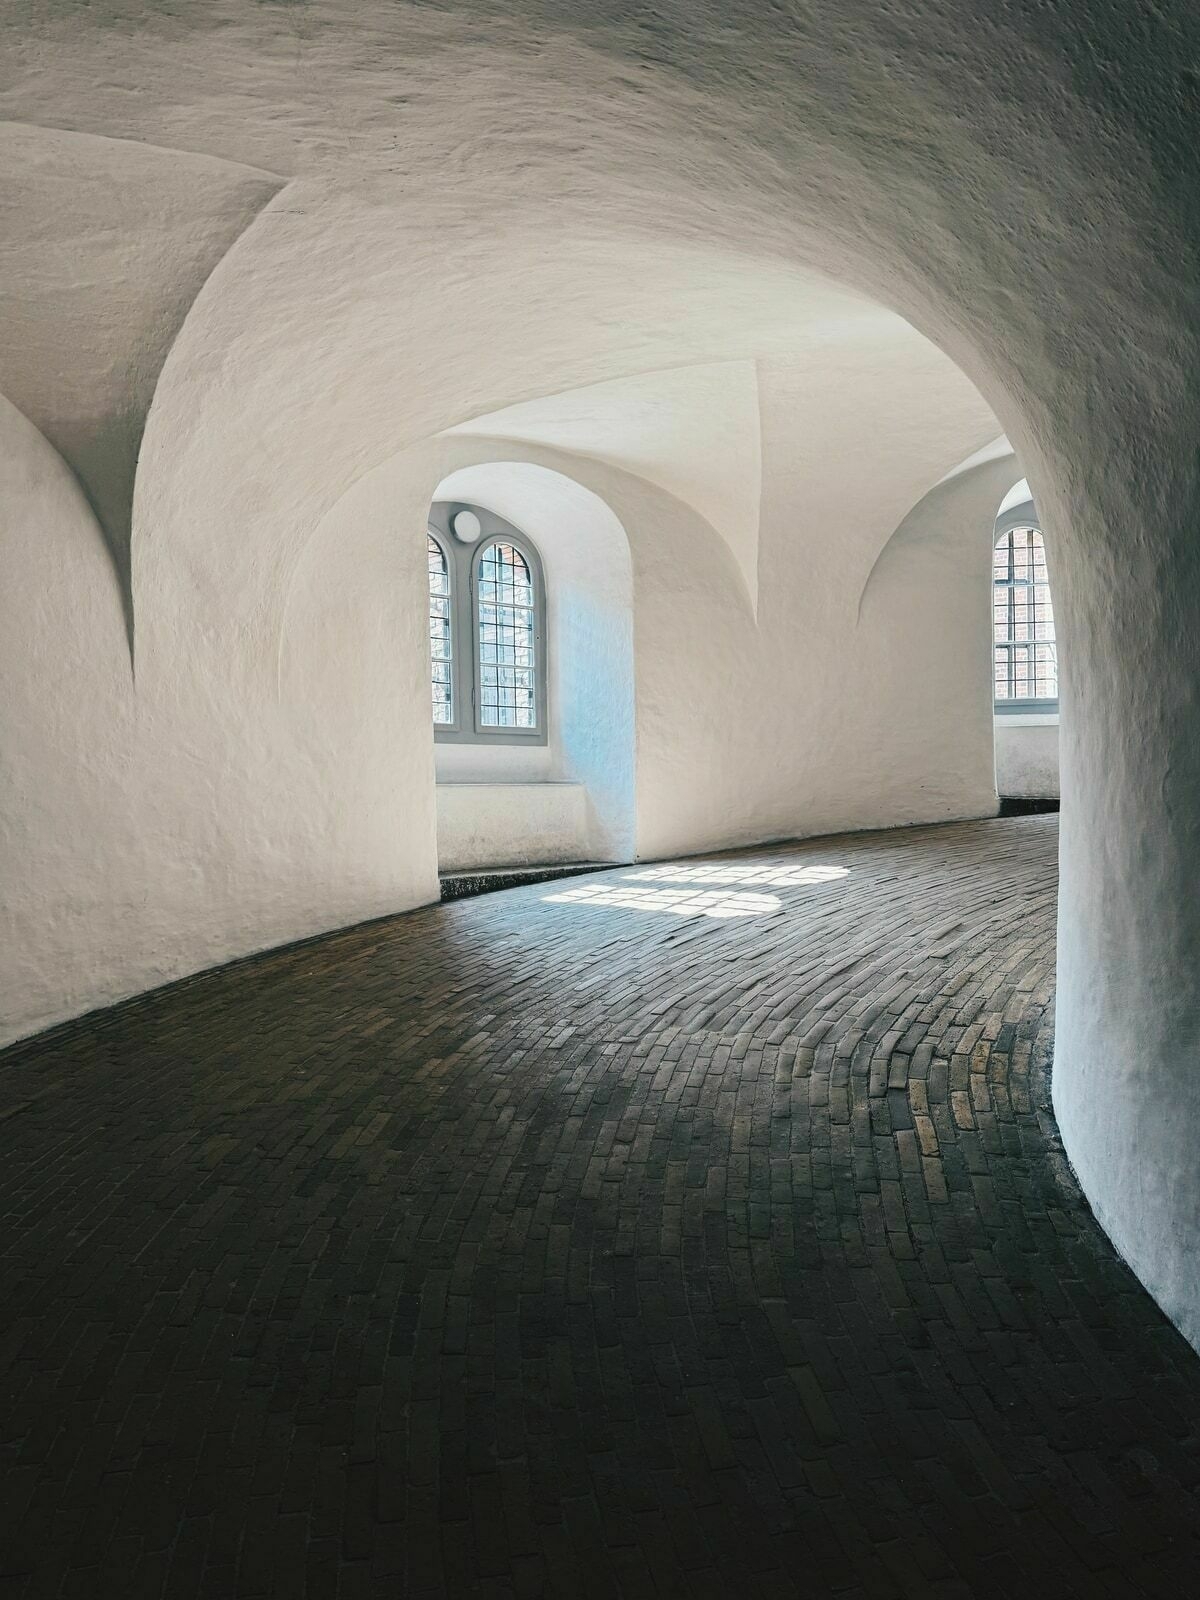 The tower’s vaulted interior with arched windows and cobblestone flooring. Sunlight filters through the windows, casting light patterns on the walls and floor. 